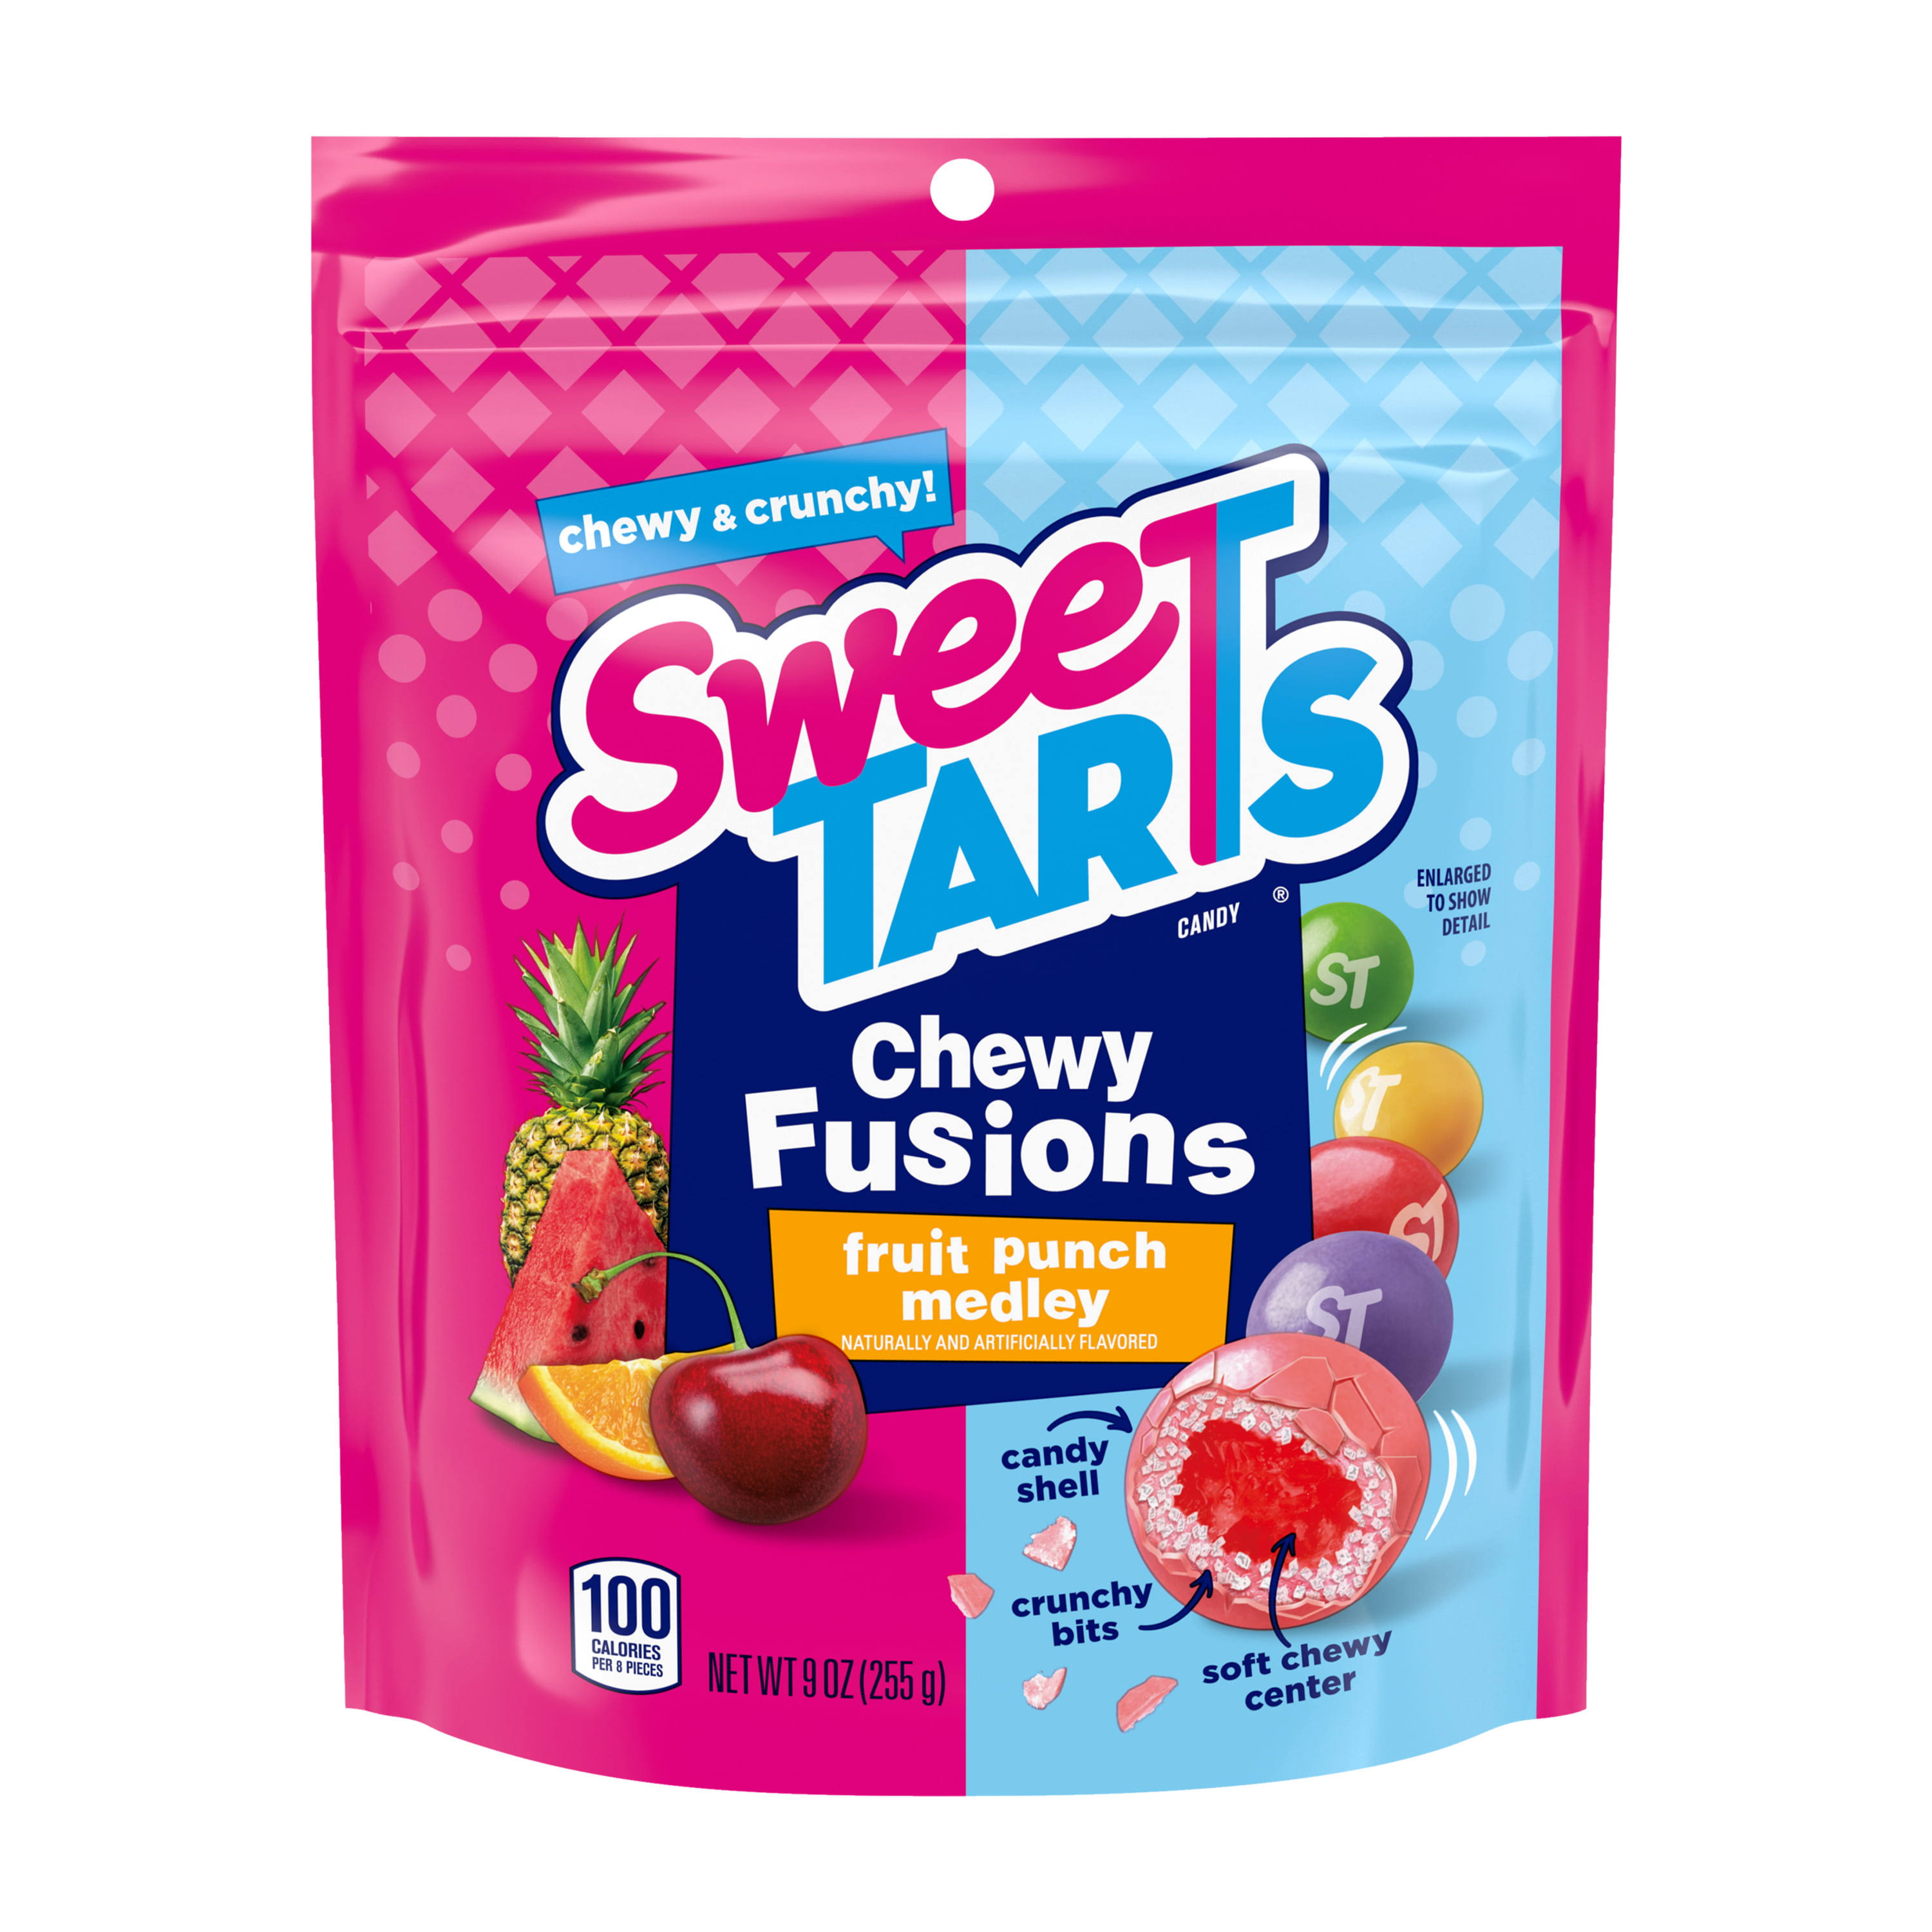 Sweetarts Chewy Fusions - Fruit Punch Medley